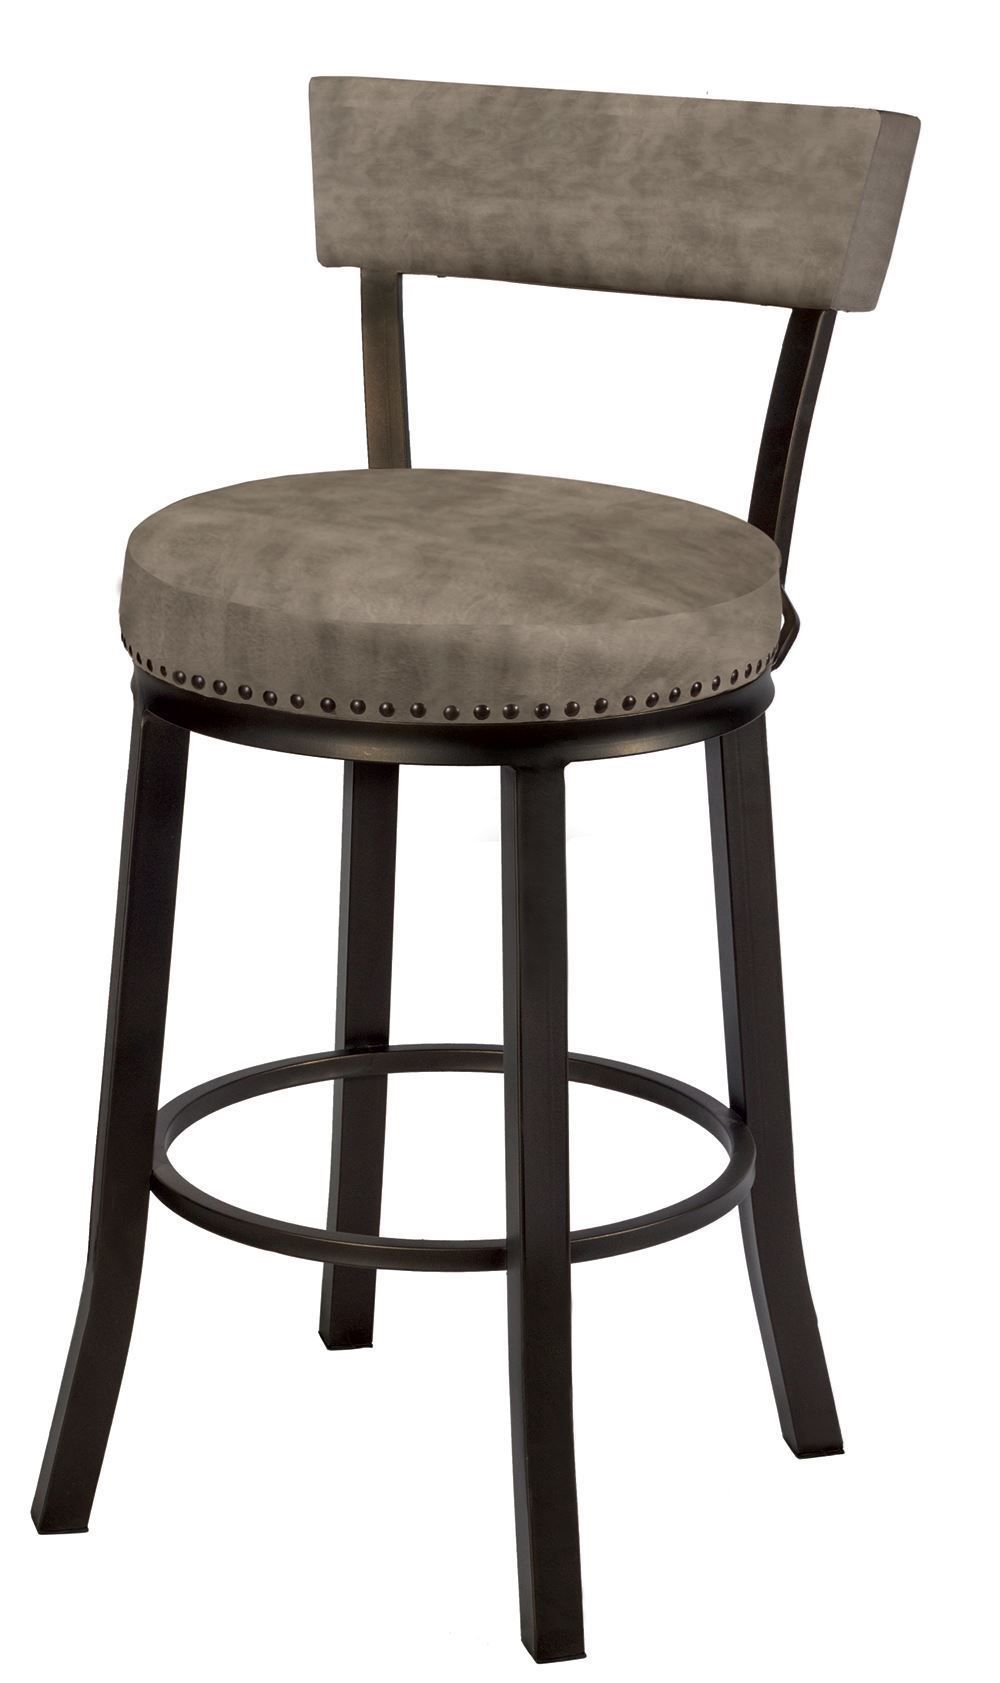 Top 24 Counter Stools Swivel of all time The ultimate guide 